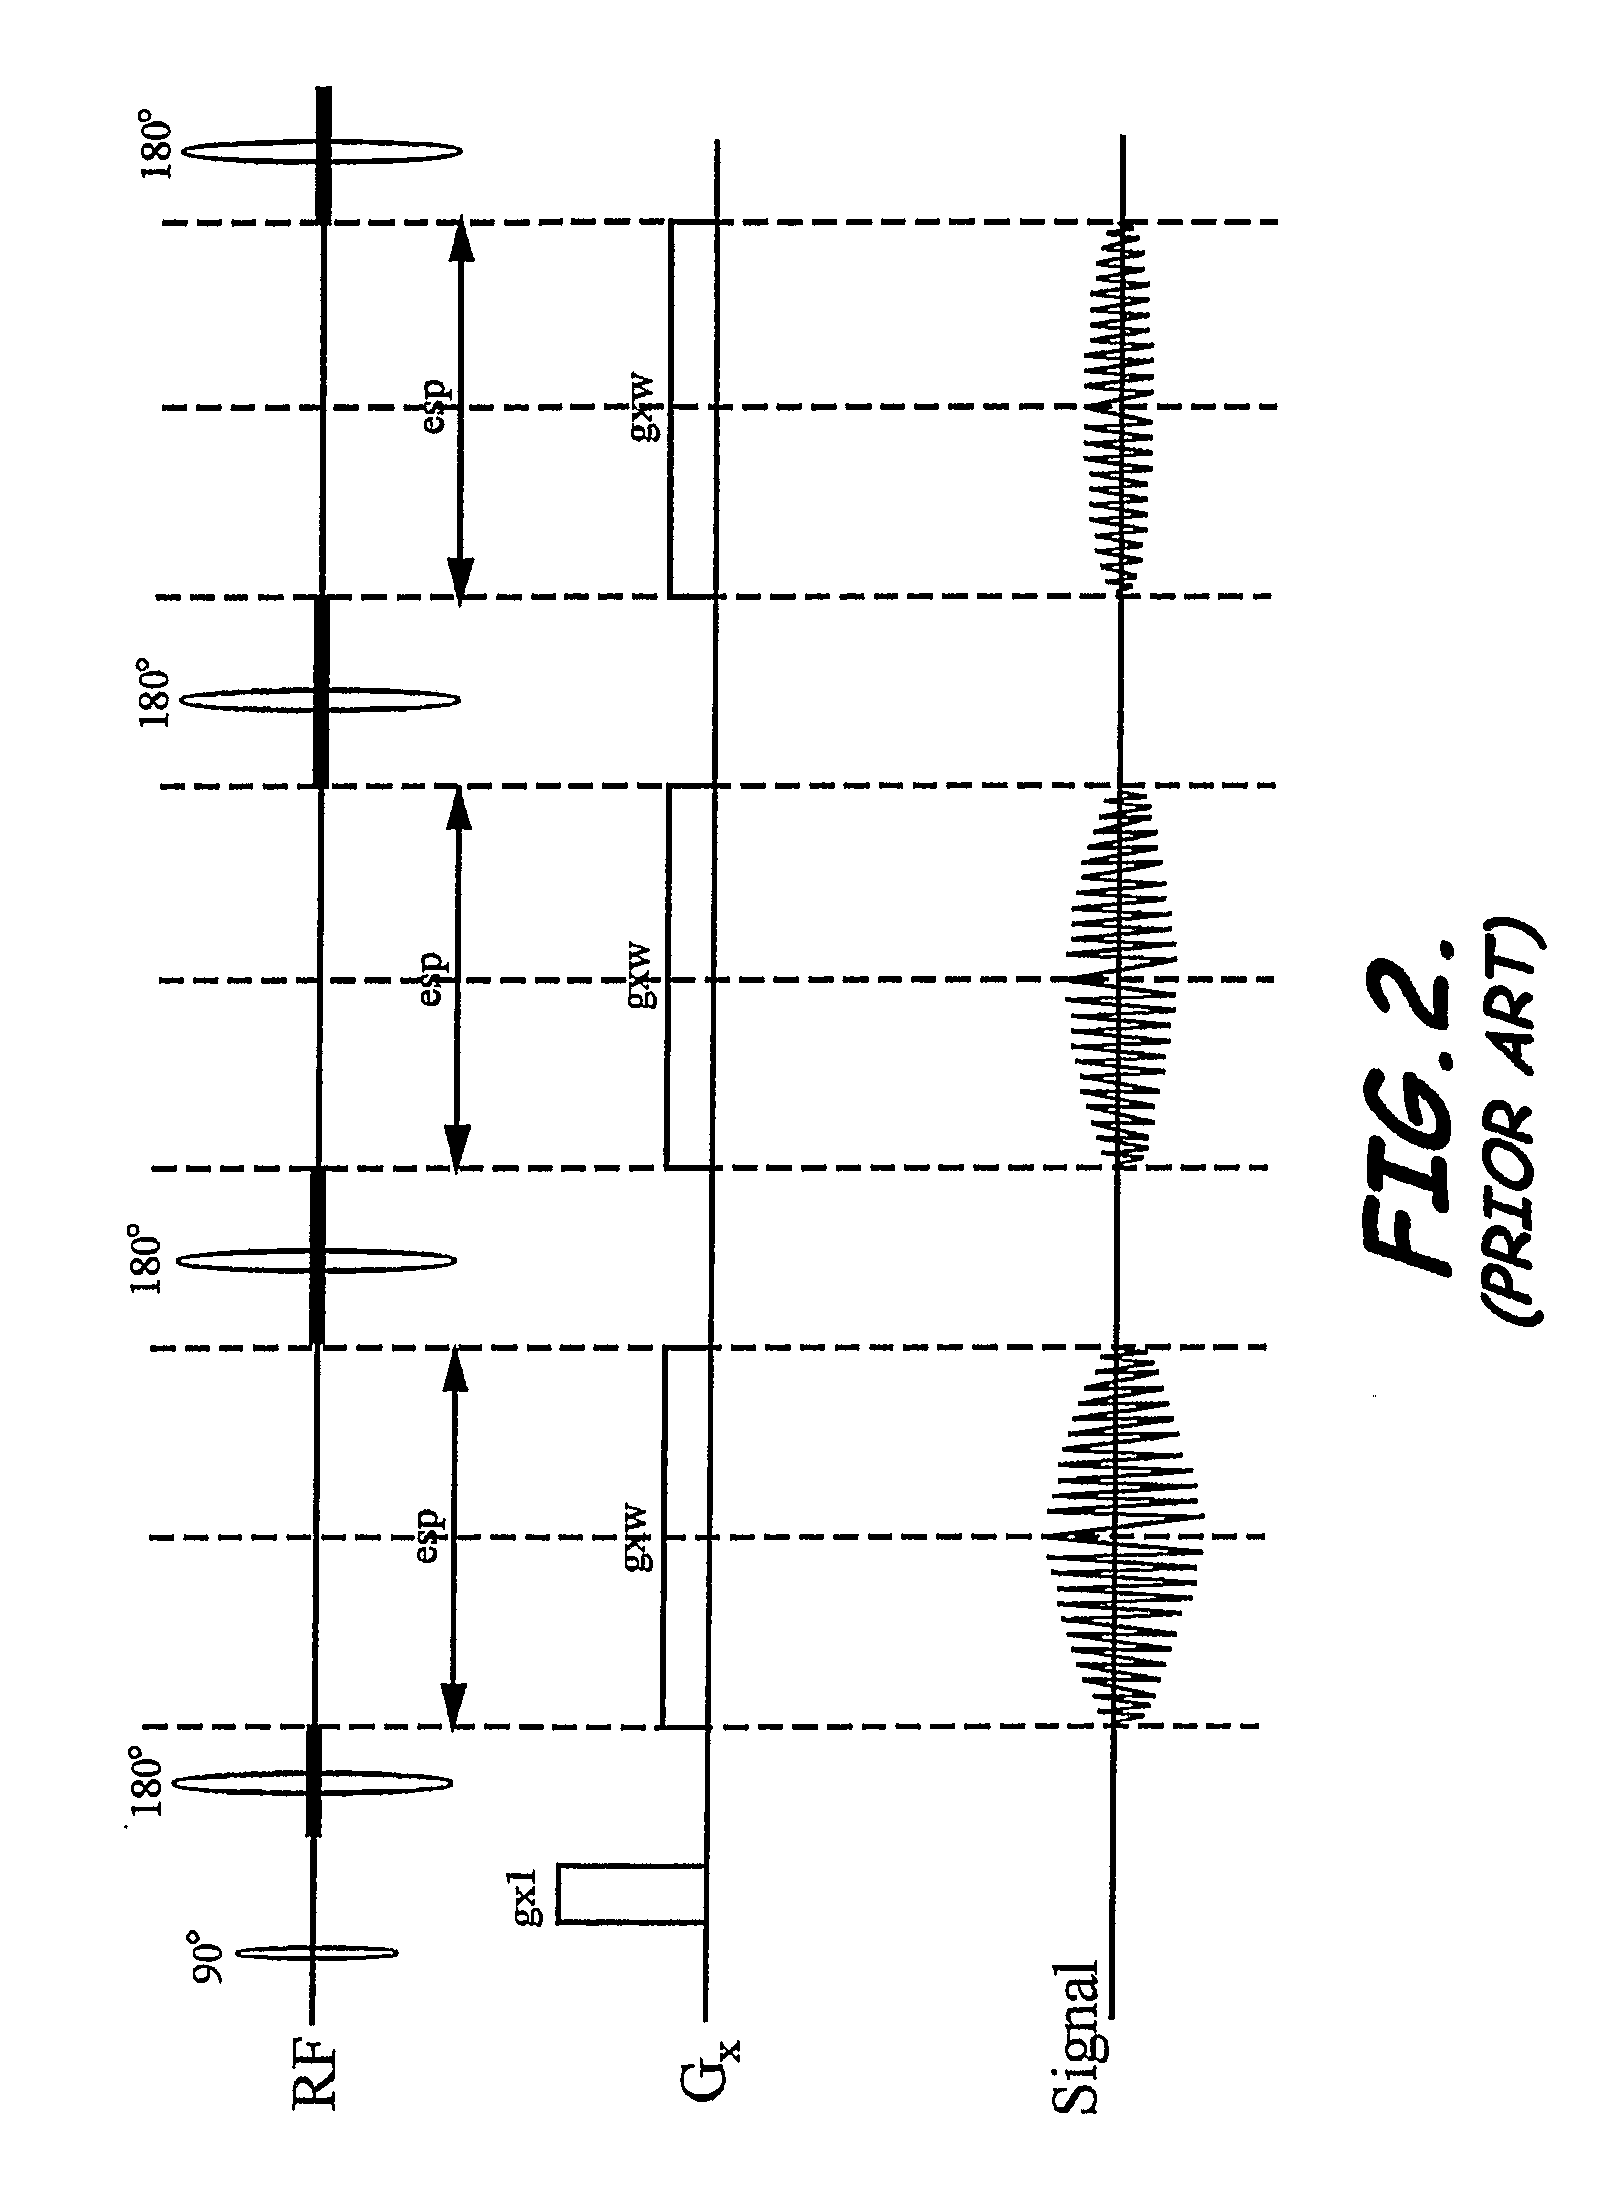 System, program product, and method of acquiring and processing MRI data for simultaneous determination of water, fat, and transverse relaxation time constants